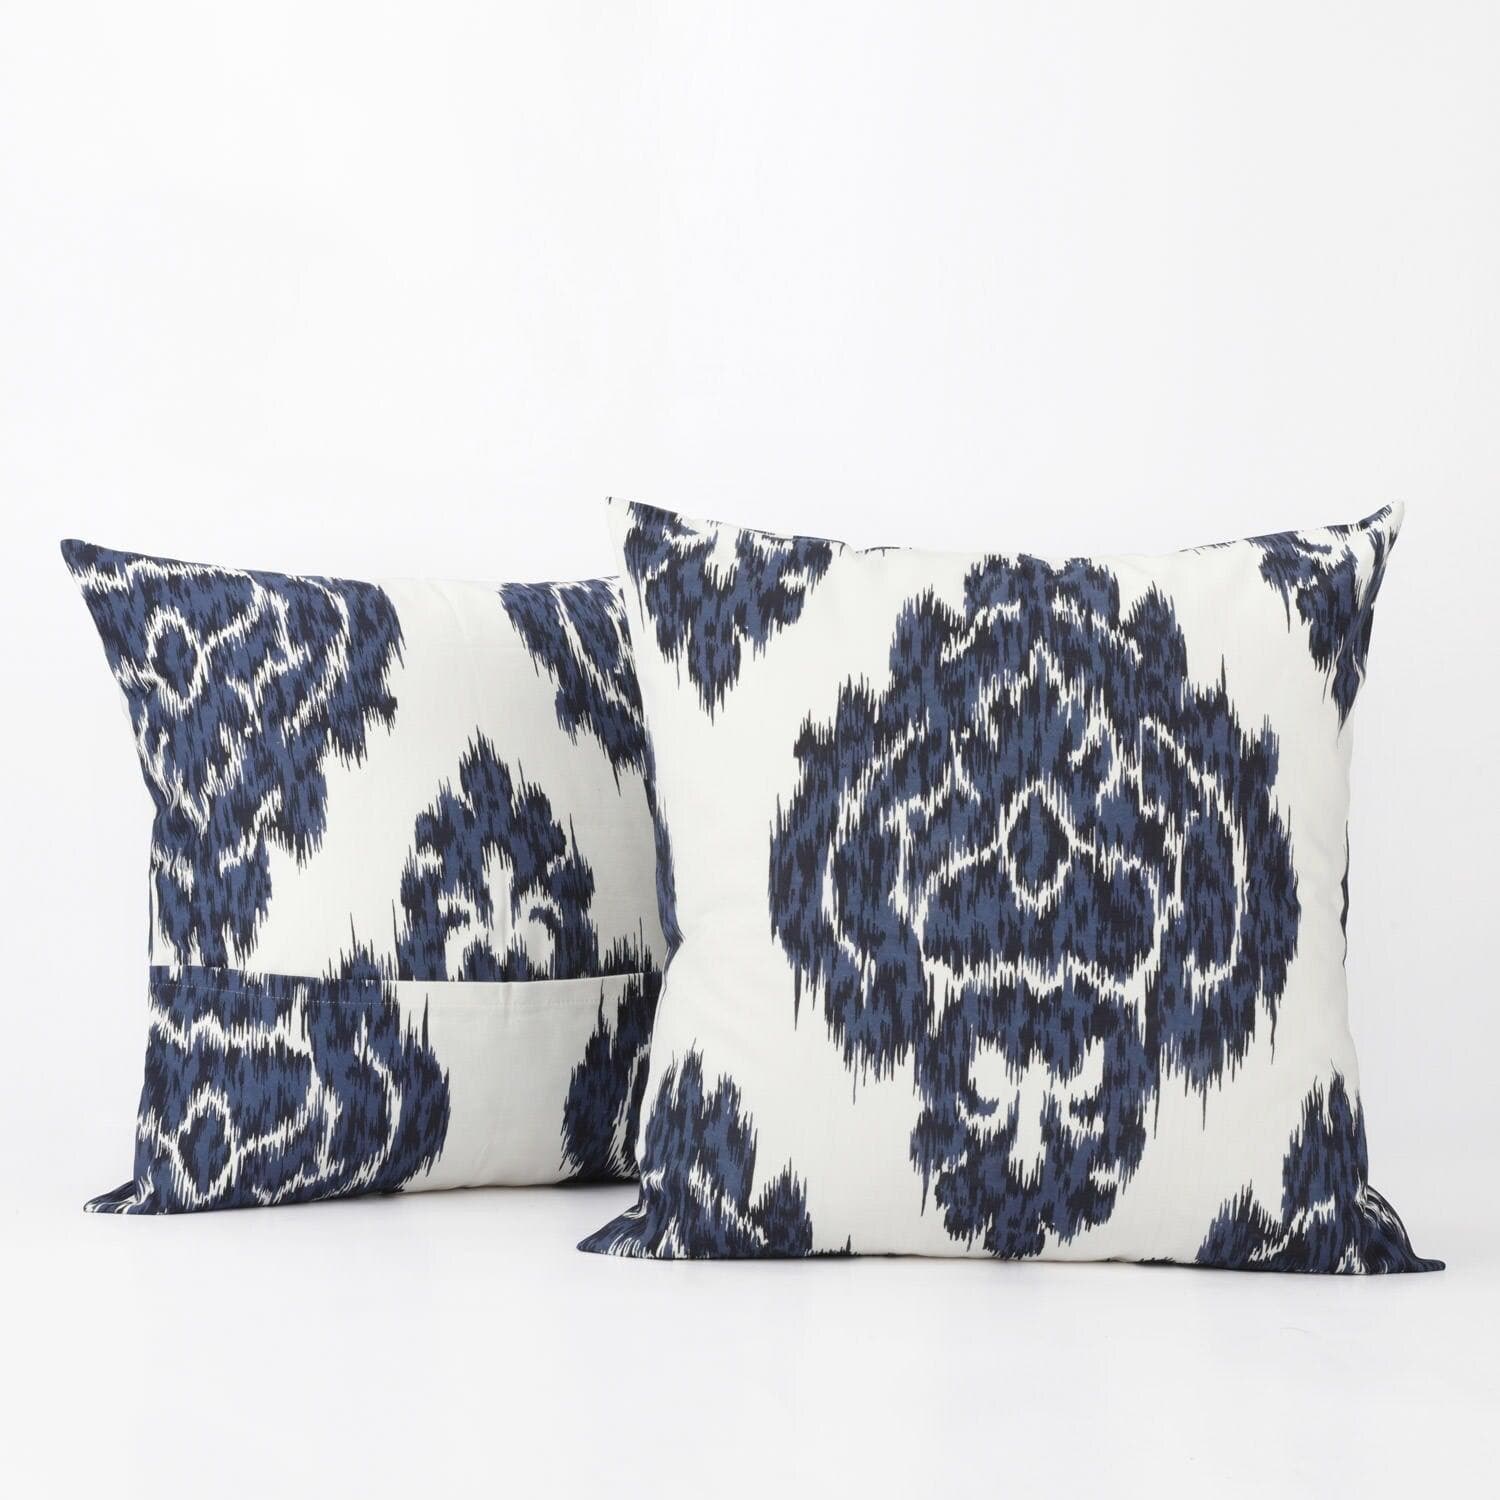 Ikat Blue Printed Cotton Cushion Covers - Pair